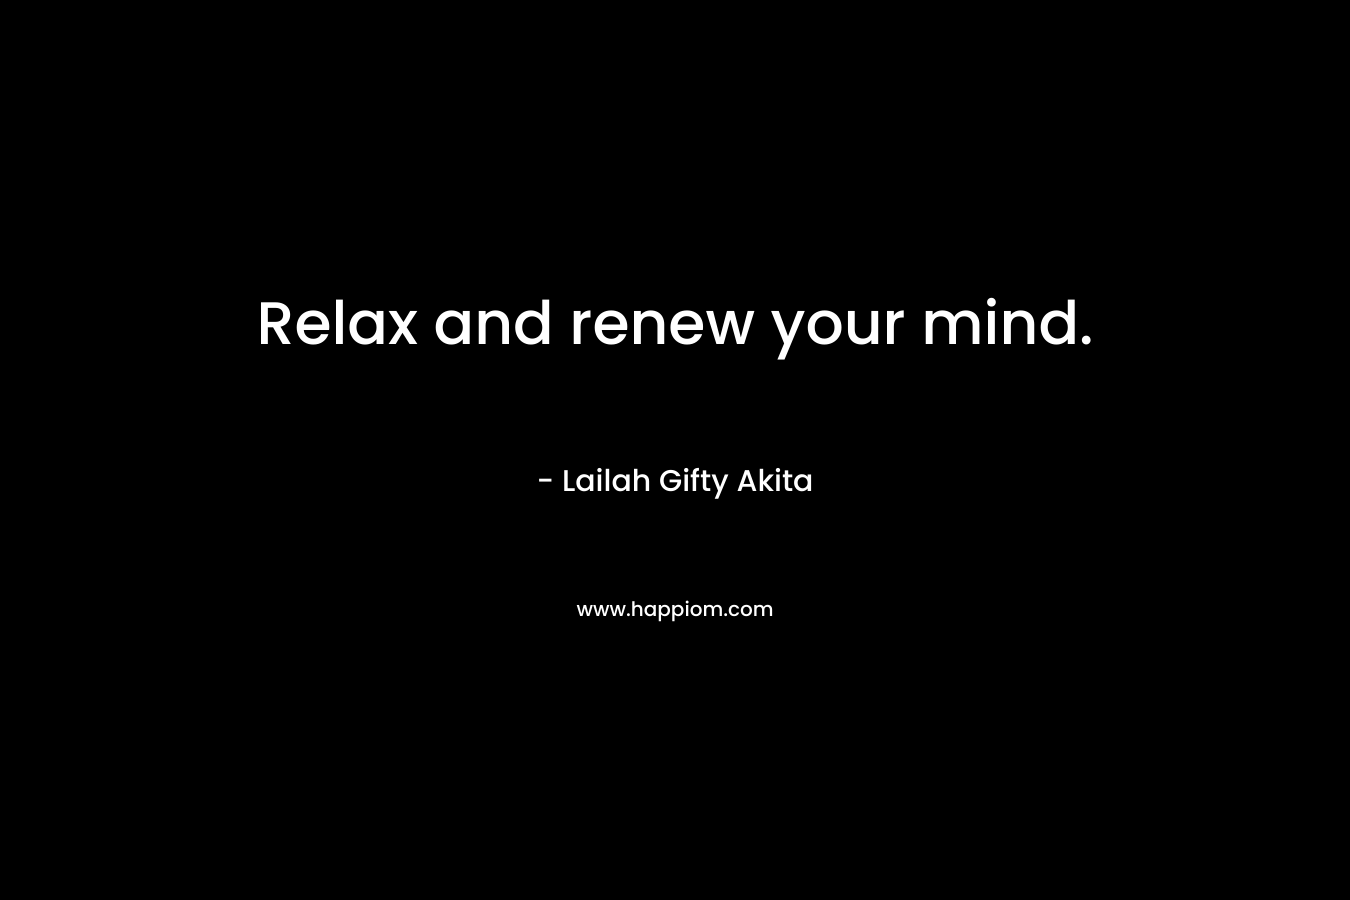 Relax and renew your mind.